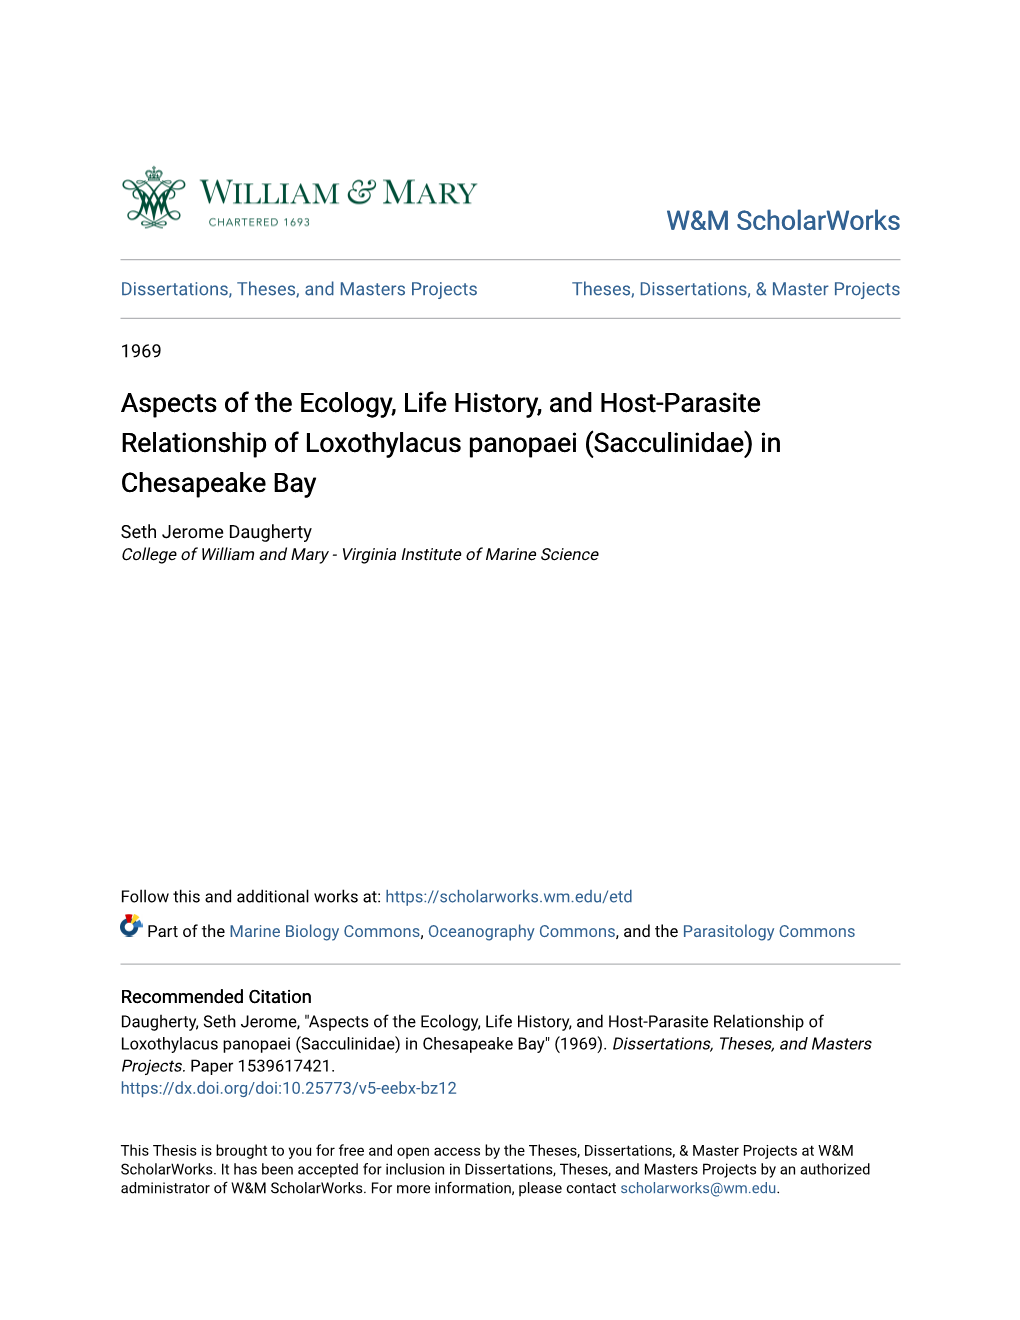 Aspects of the Ecology, Life History, and Host-Parasite Relationship of Loxothylacus Panopaei (Sacculinidae) in Chesapeake Bay